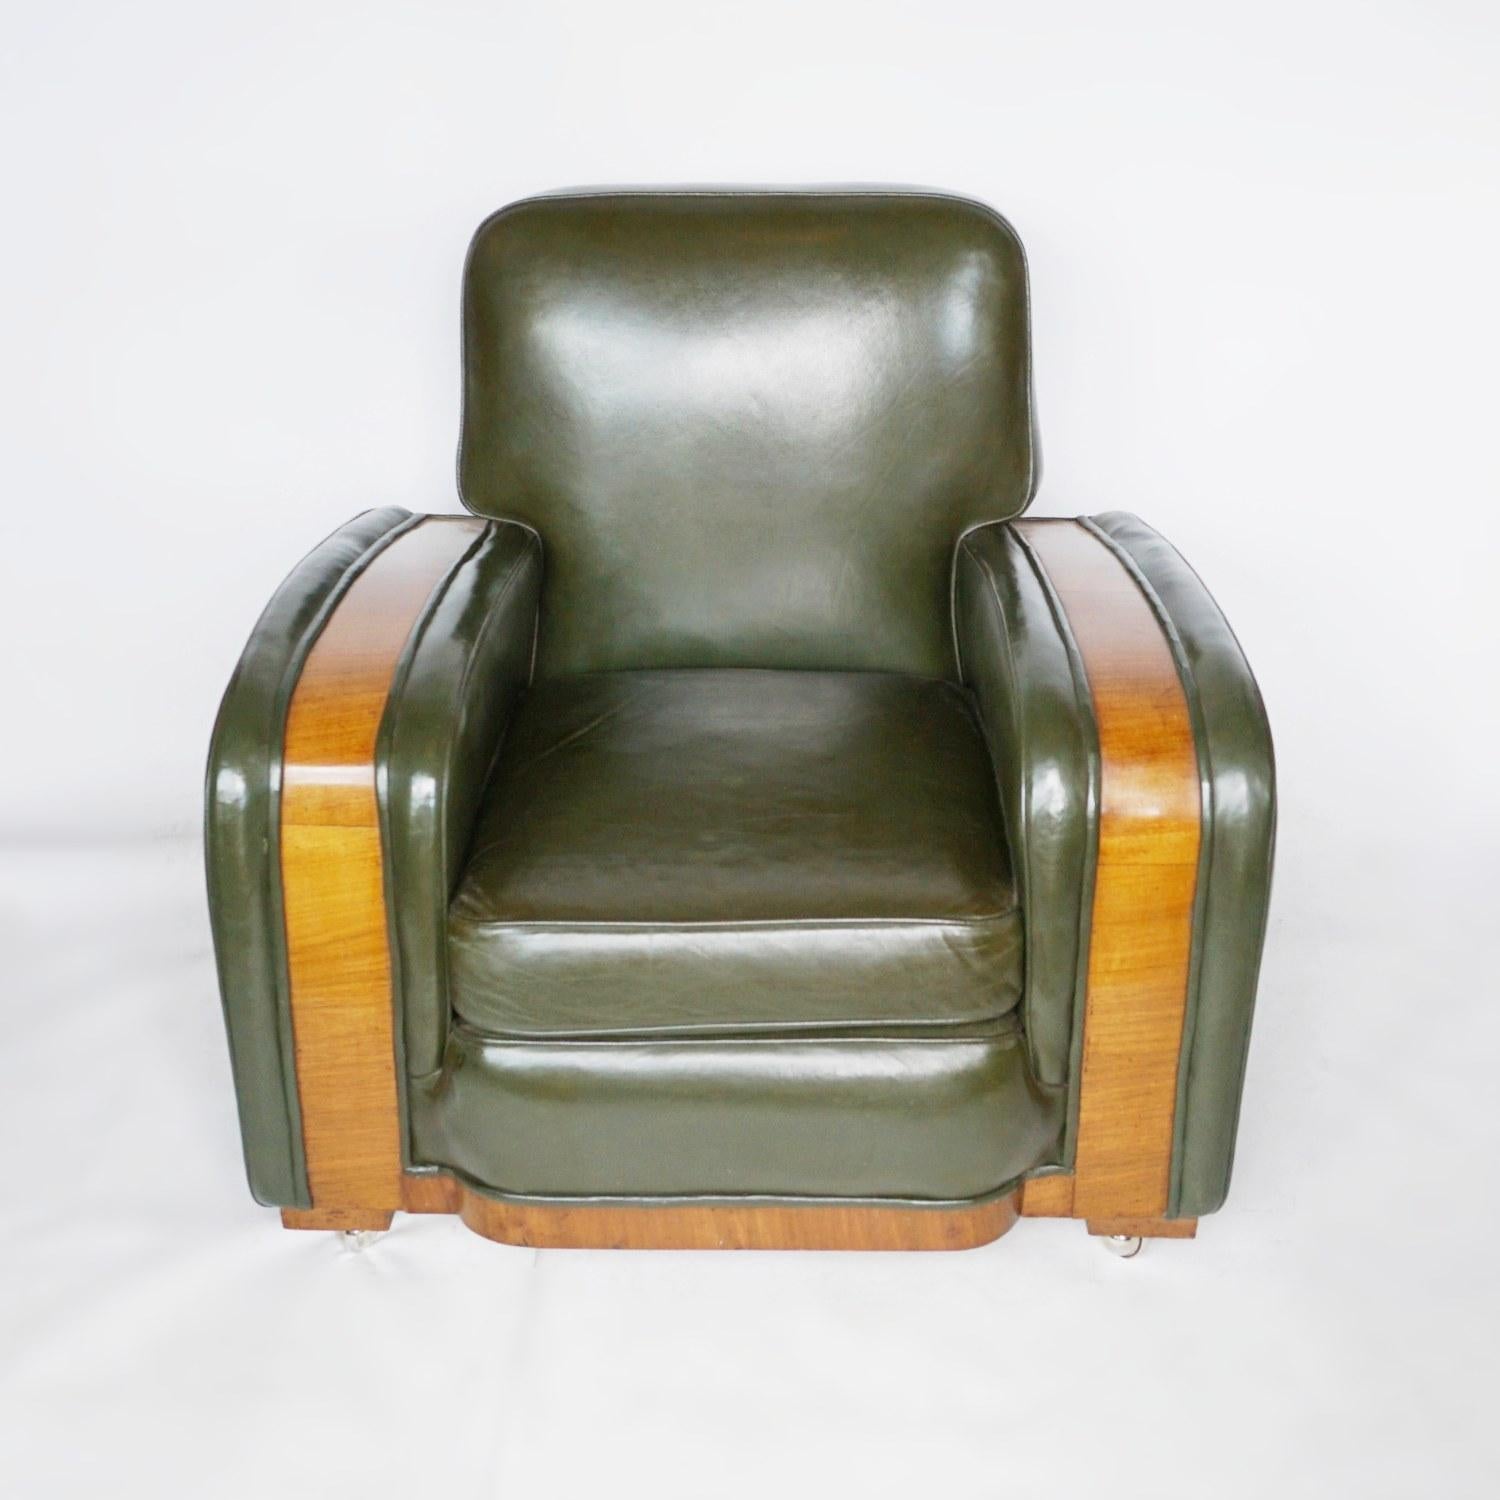 Leather Pair of Art Deco Tank Chairs Attributed to Heal's of London